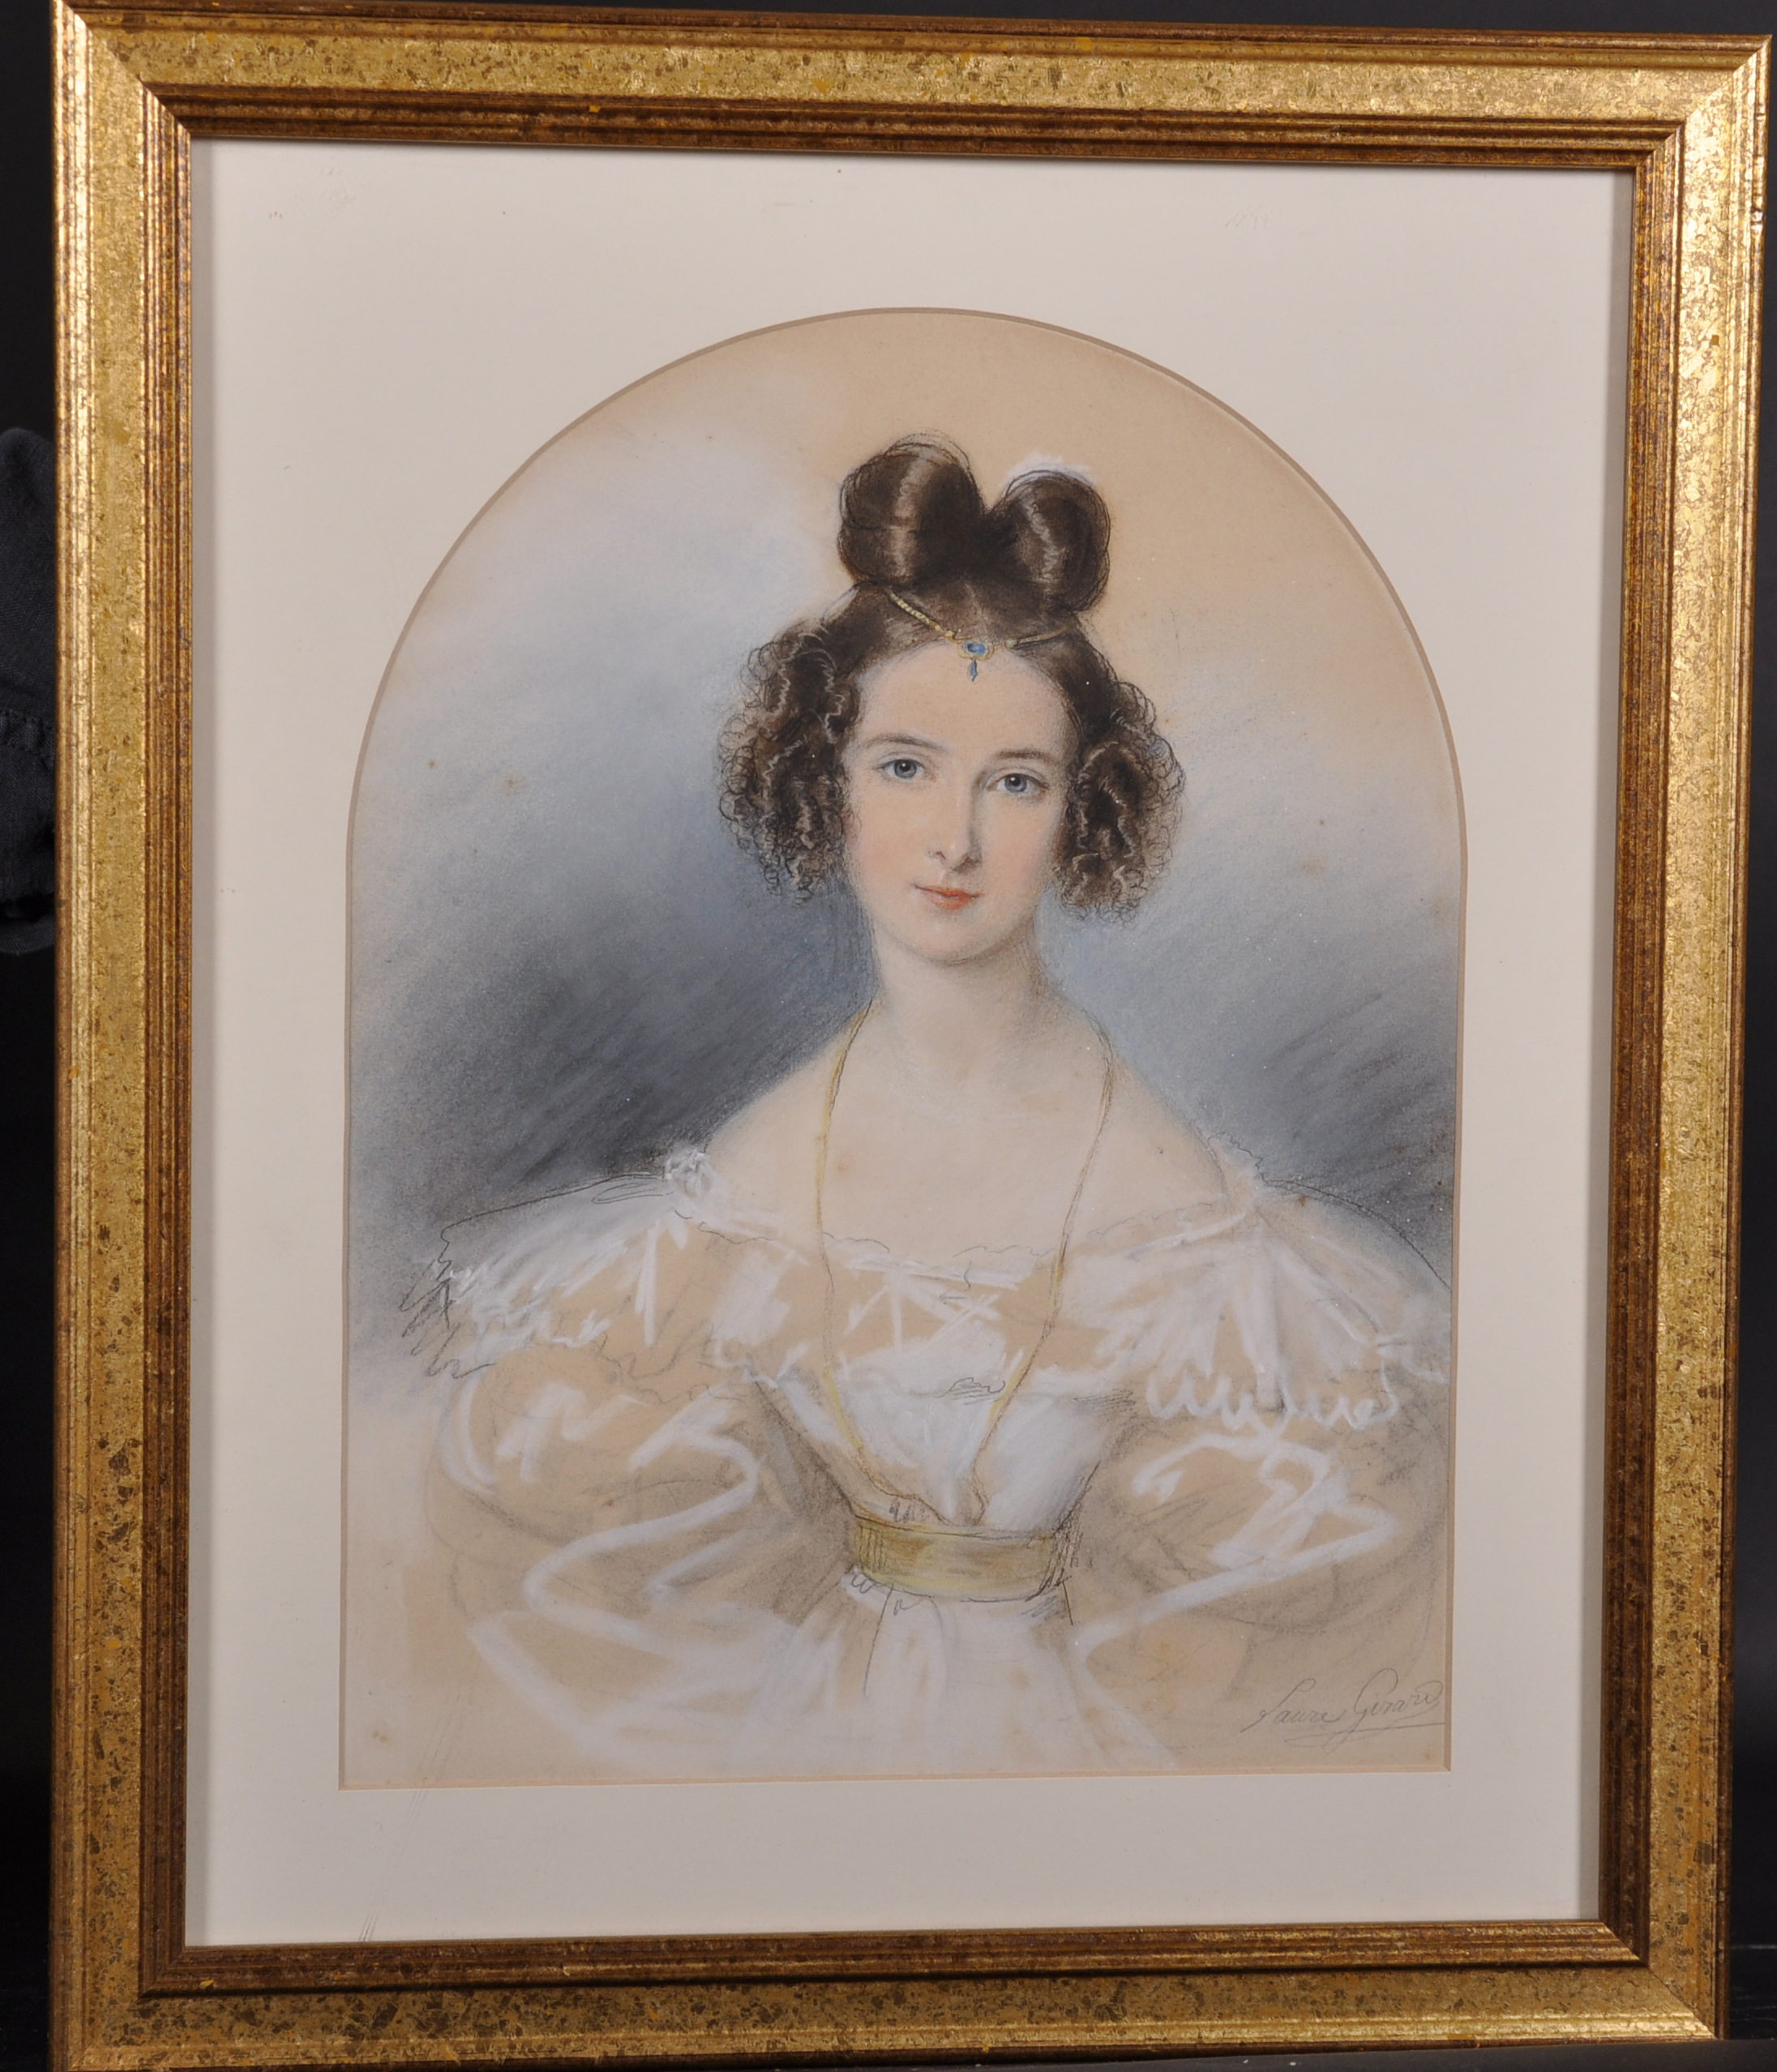 Laure Girard (19th Century) French. Bust Portrait of a Lady, Mixed Media, Signed in Pencil, - Image 2 of 5